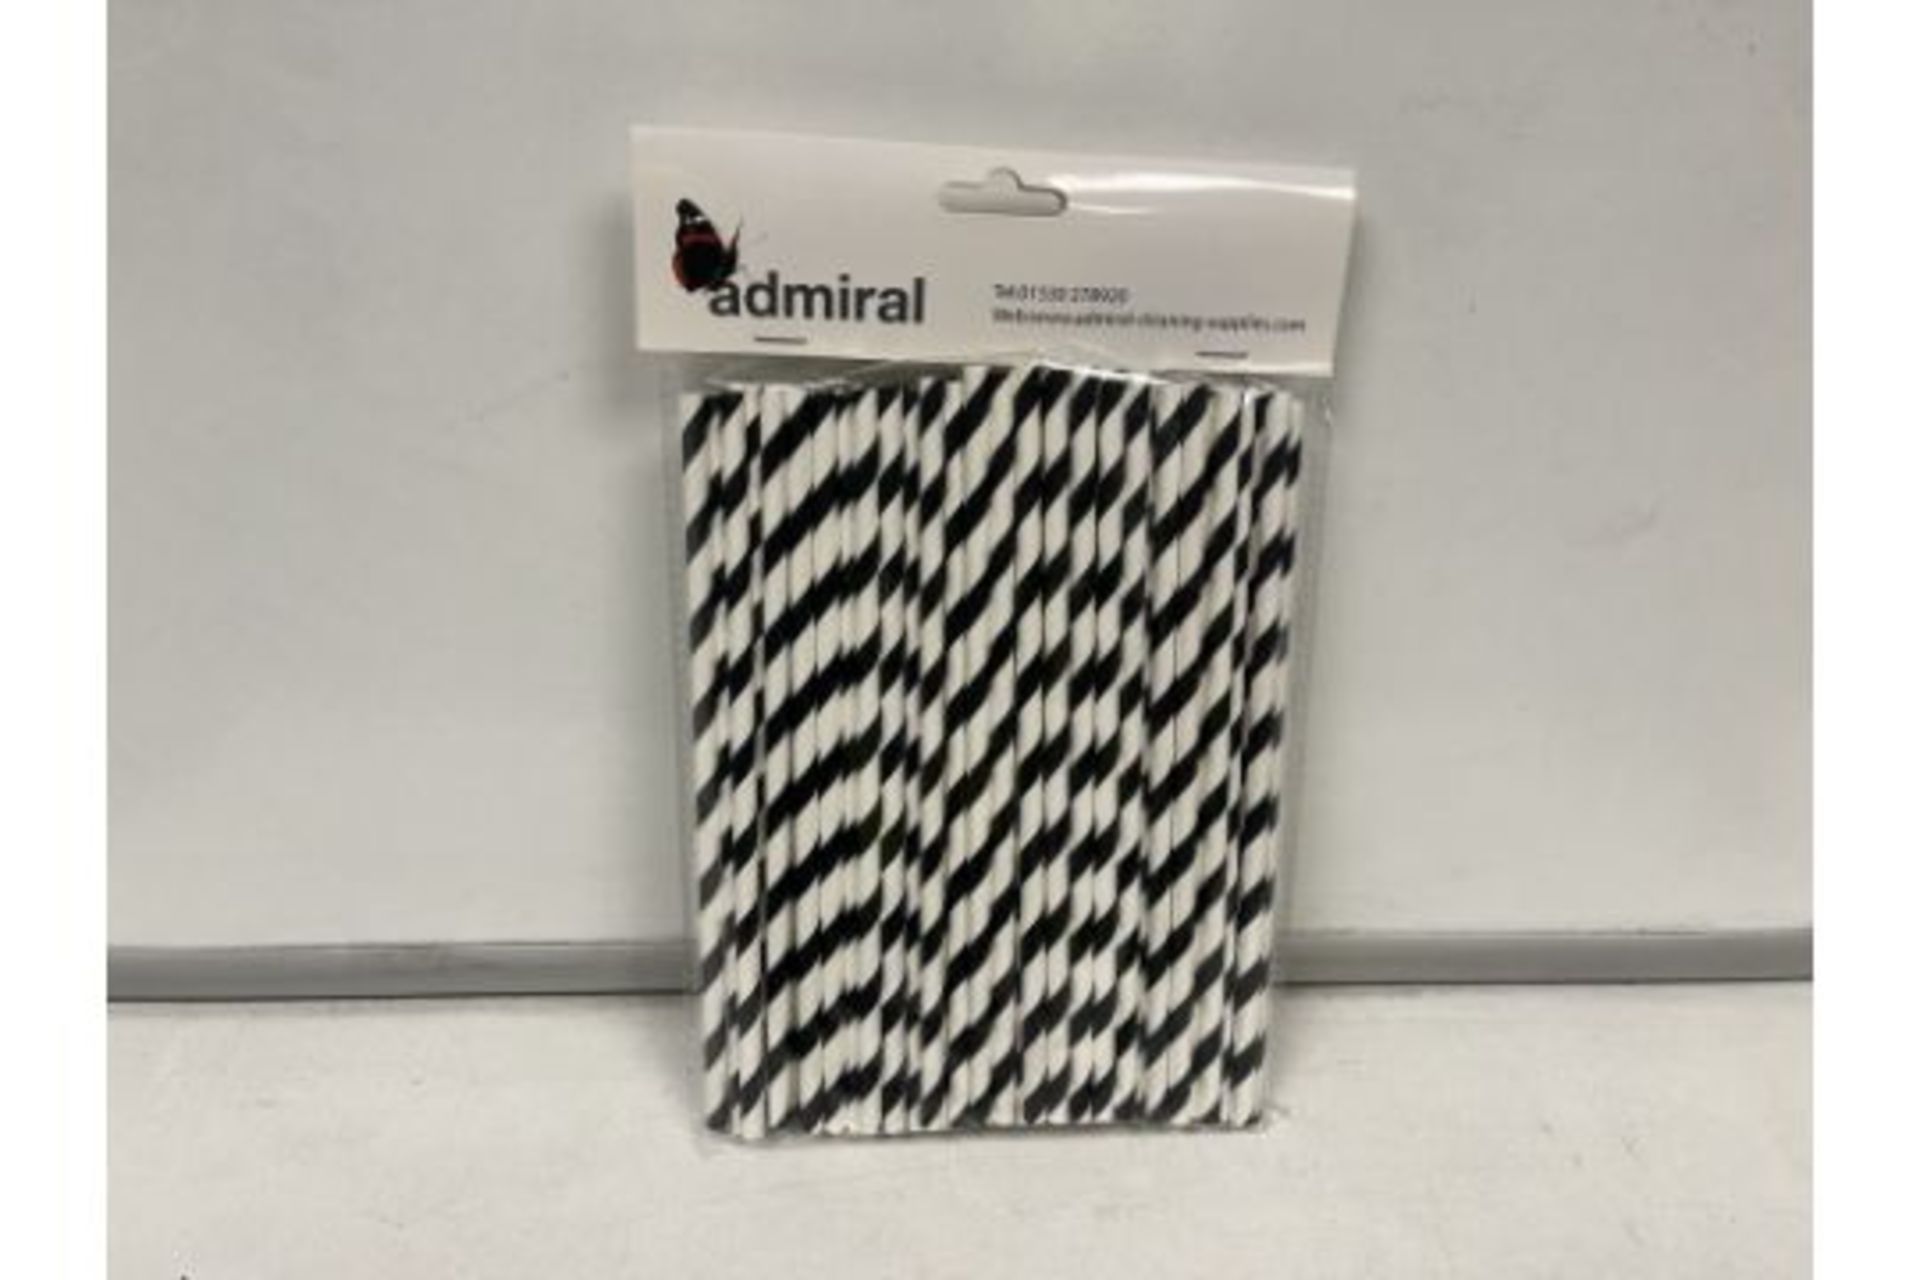 200 X NEW PACKS OF 100 ADMIRAL PAPER DRINKING STRAWS. ROW 17 TOP